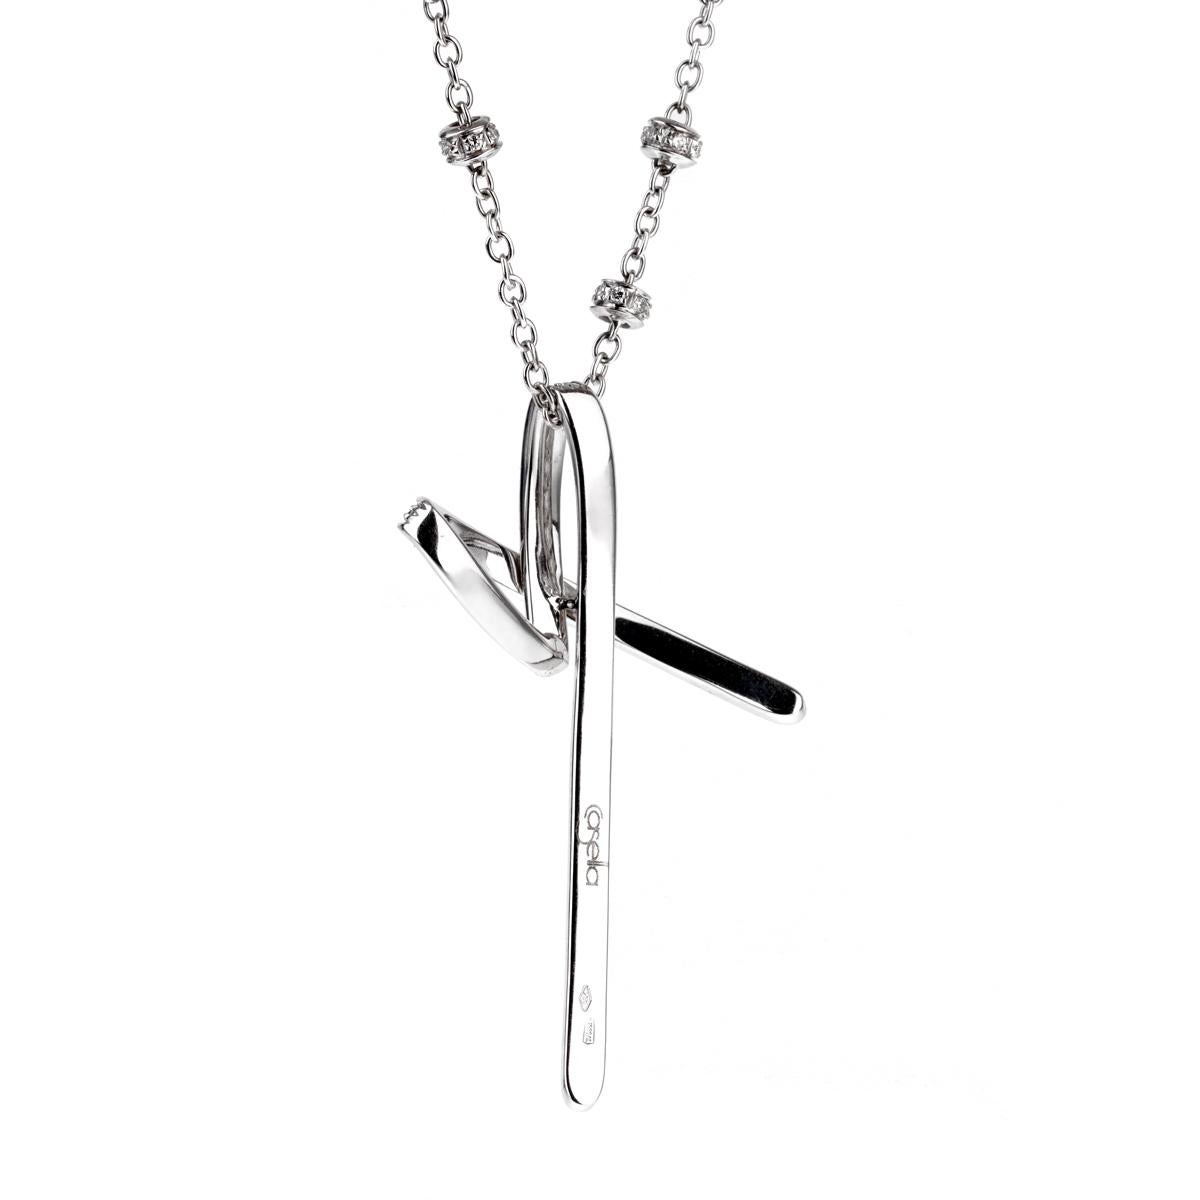 A fabulous cross necklace by Casella featuring .87ct of round brilliant cut diamonds set in 18k white gold. The pendant measures 1.14